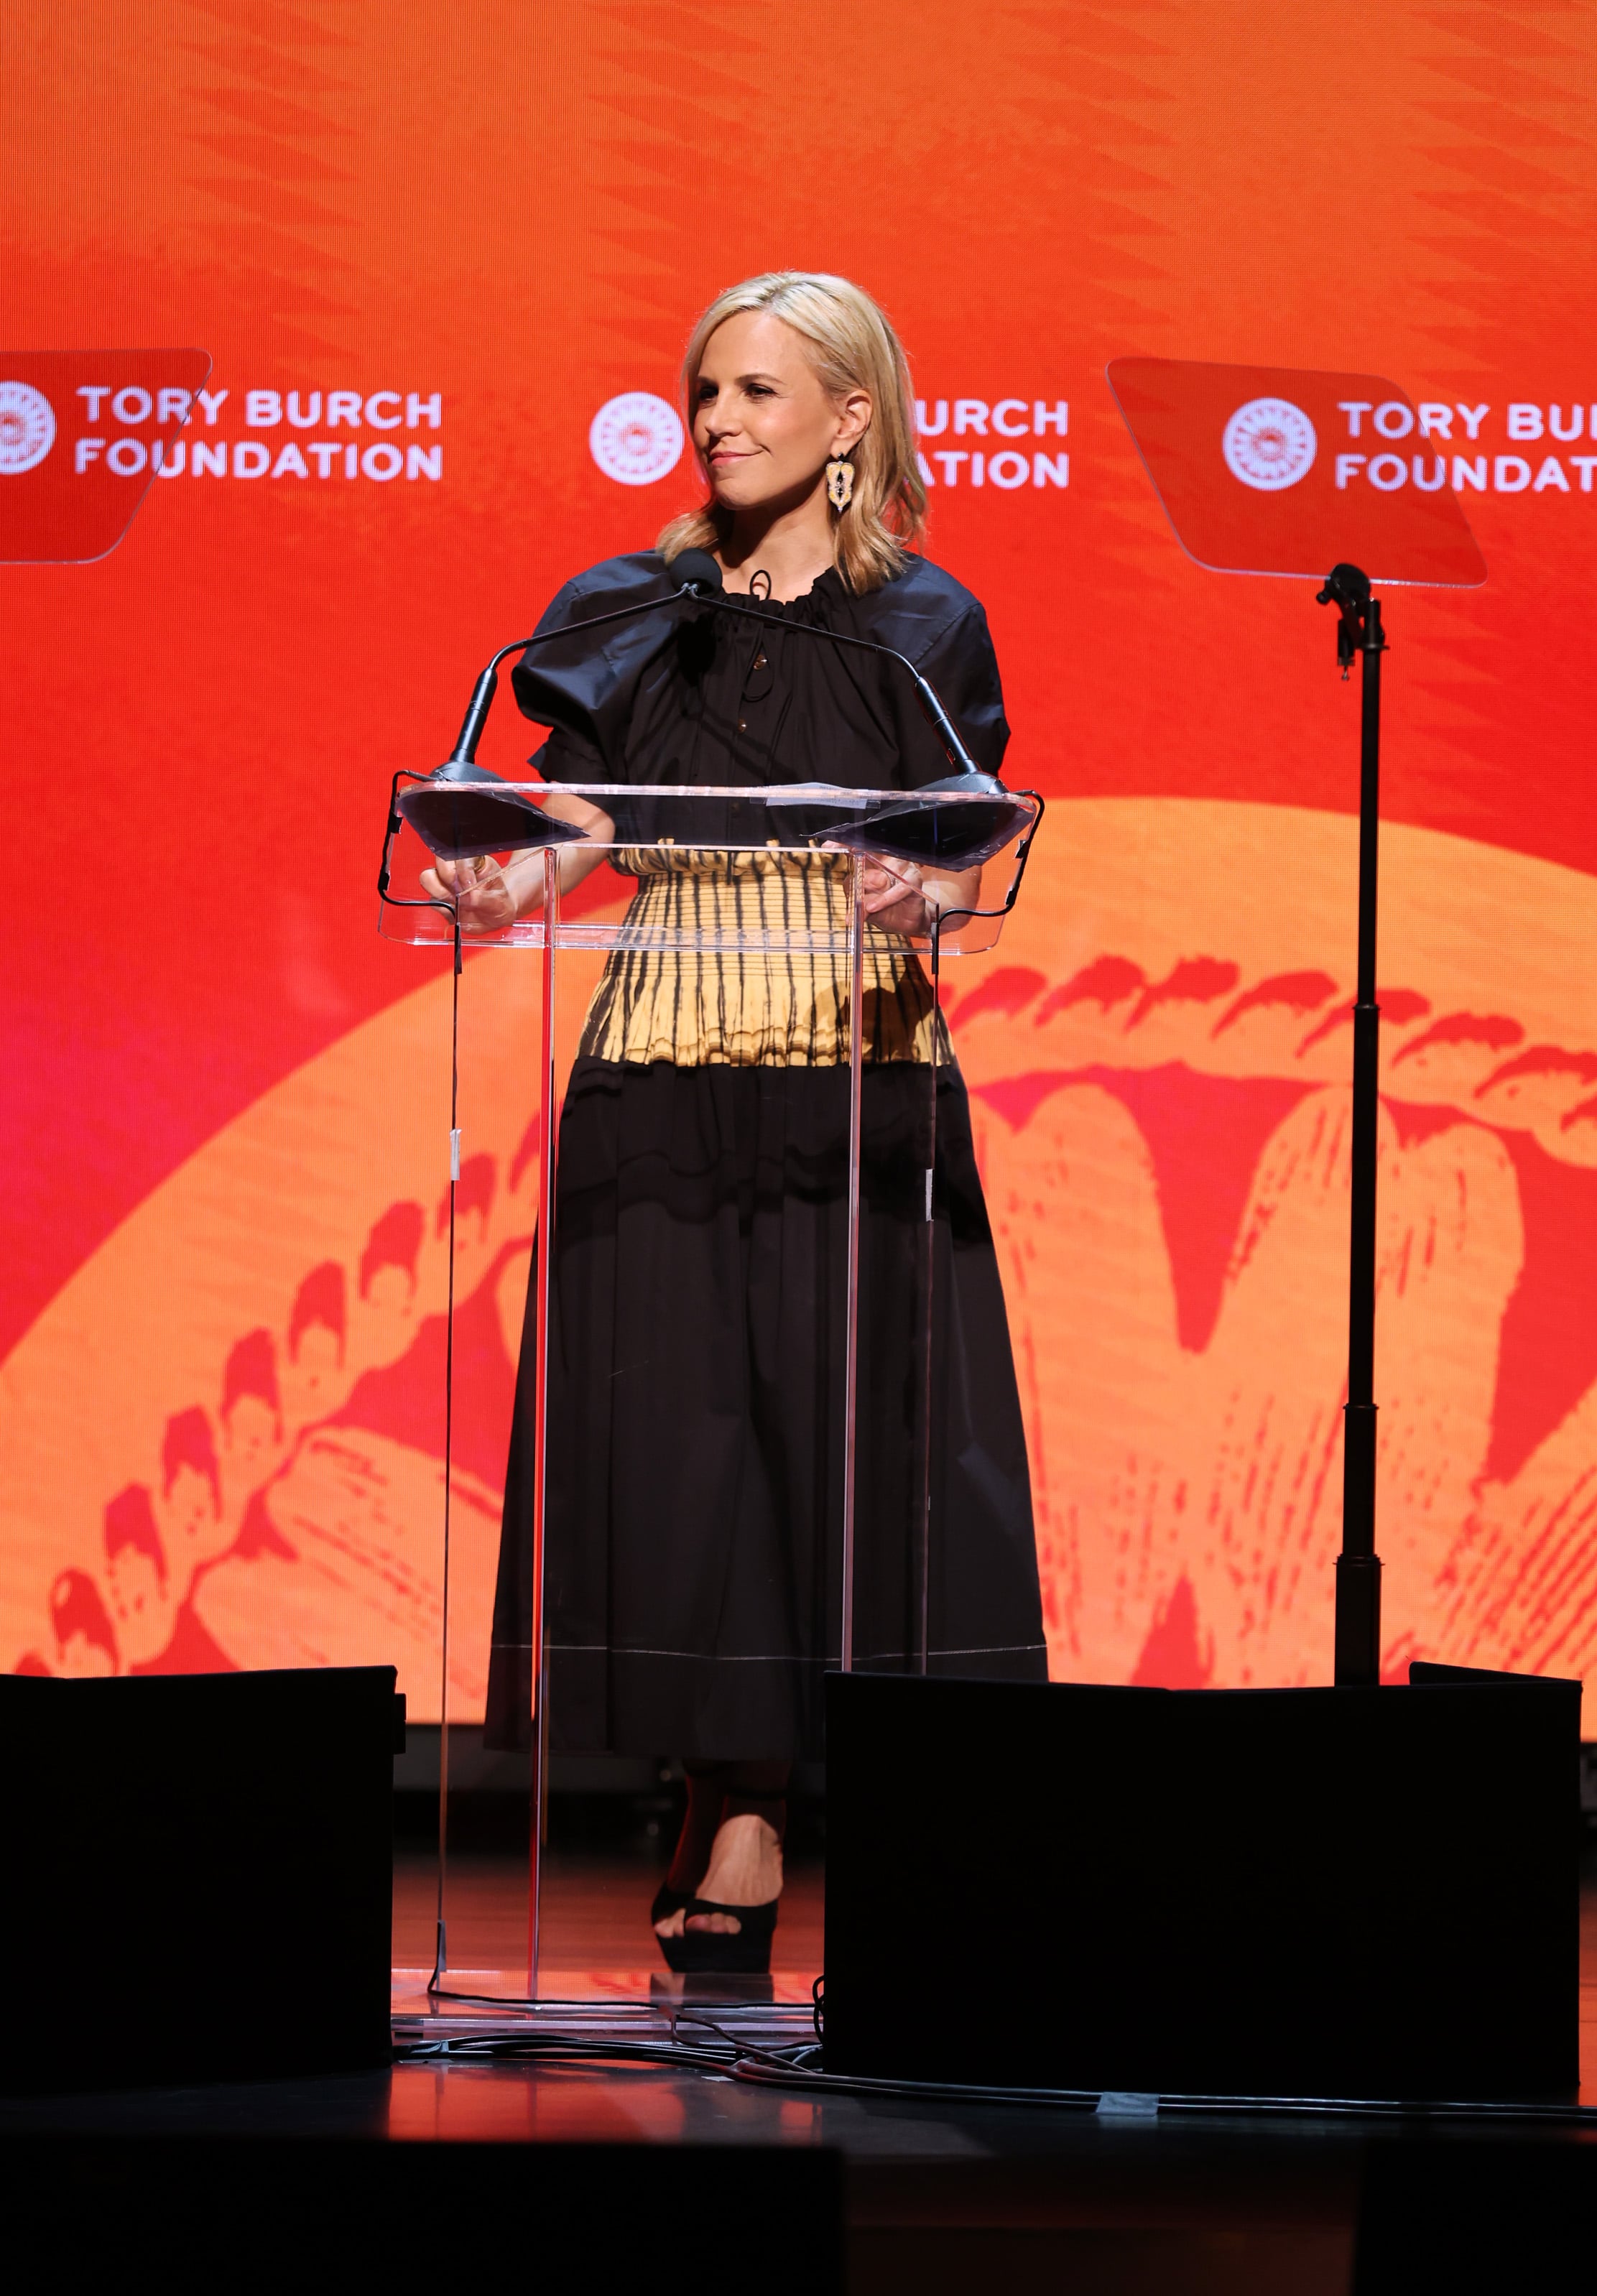 Video: The Business of Fashion interviews fashion designer Tory Burch